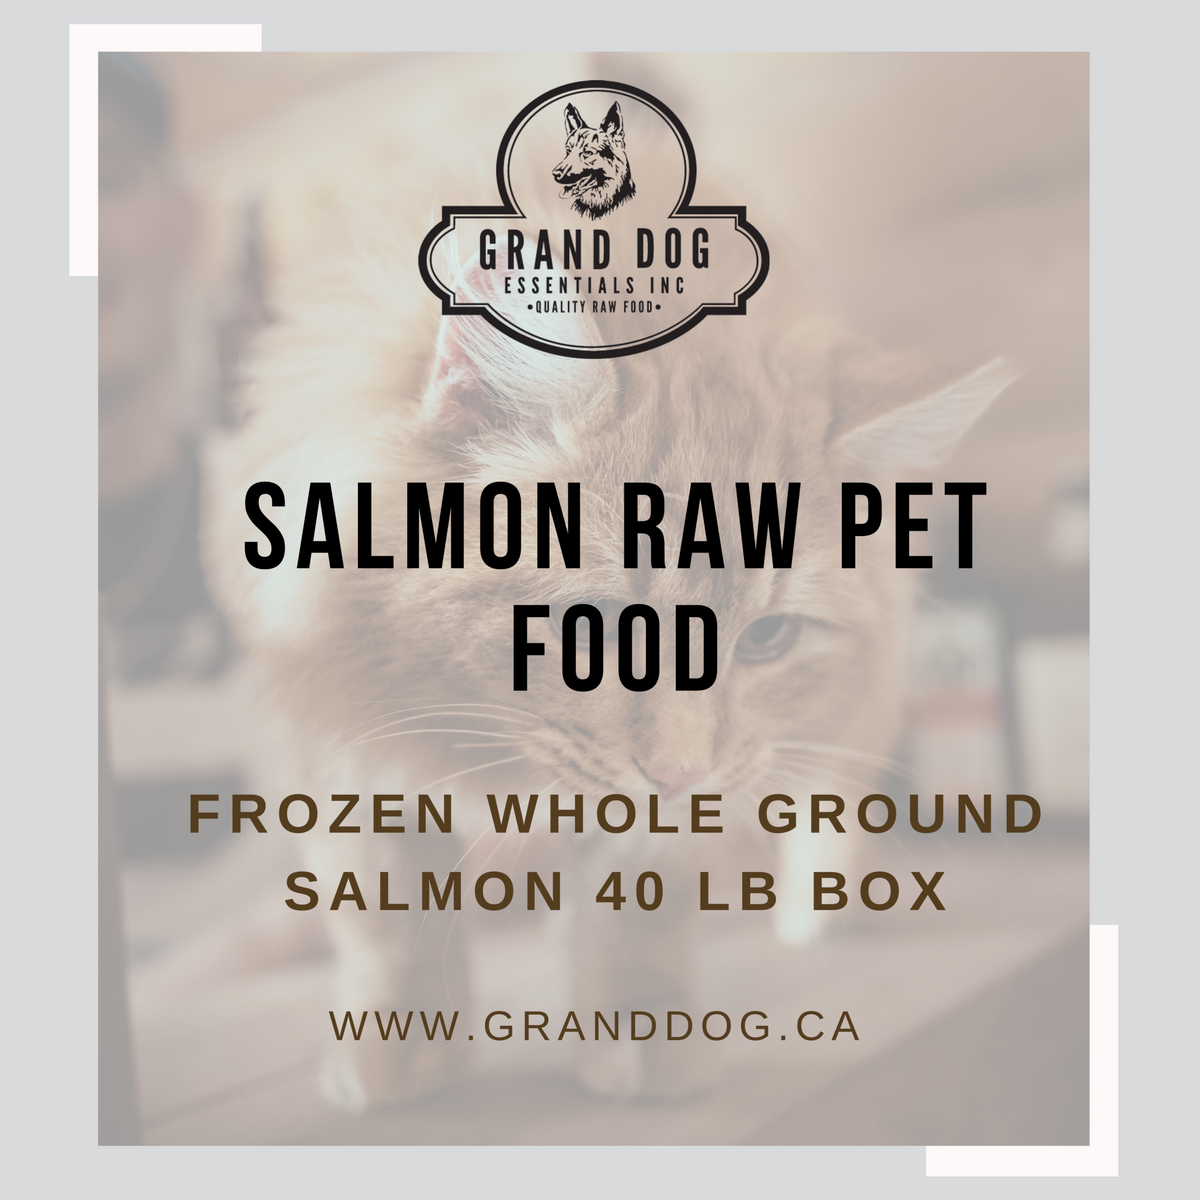 A graphic with a cat in the background faded with the wording: SALMON RAW PET FOOD: FROZEN WHOLE GROUND SALMON 40 LB BOX www.granddog.ca